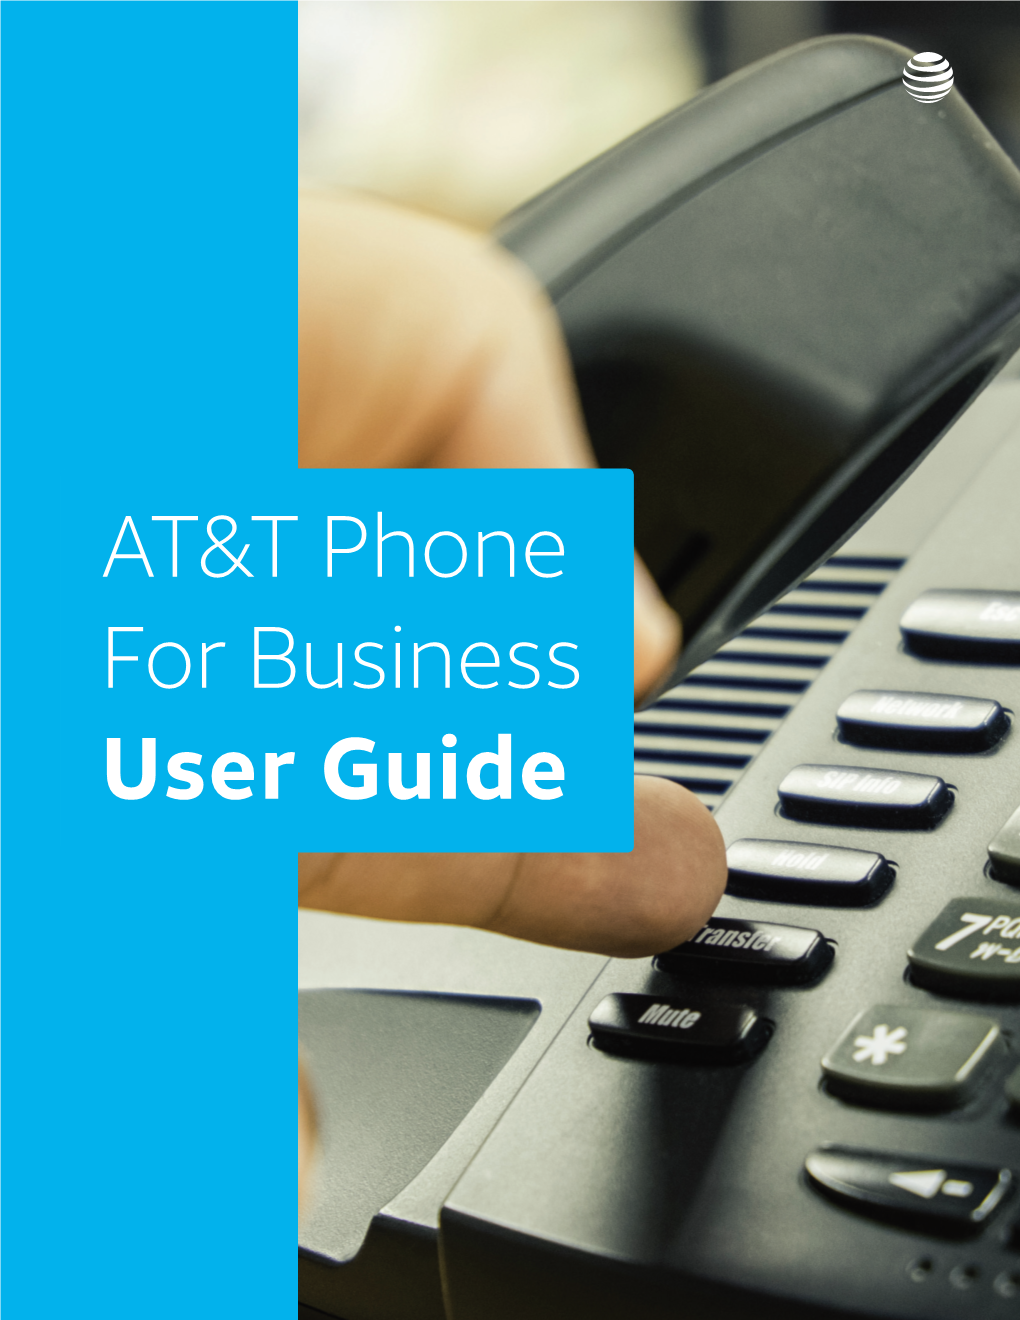 AT&T Phone for Business User Guide